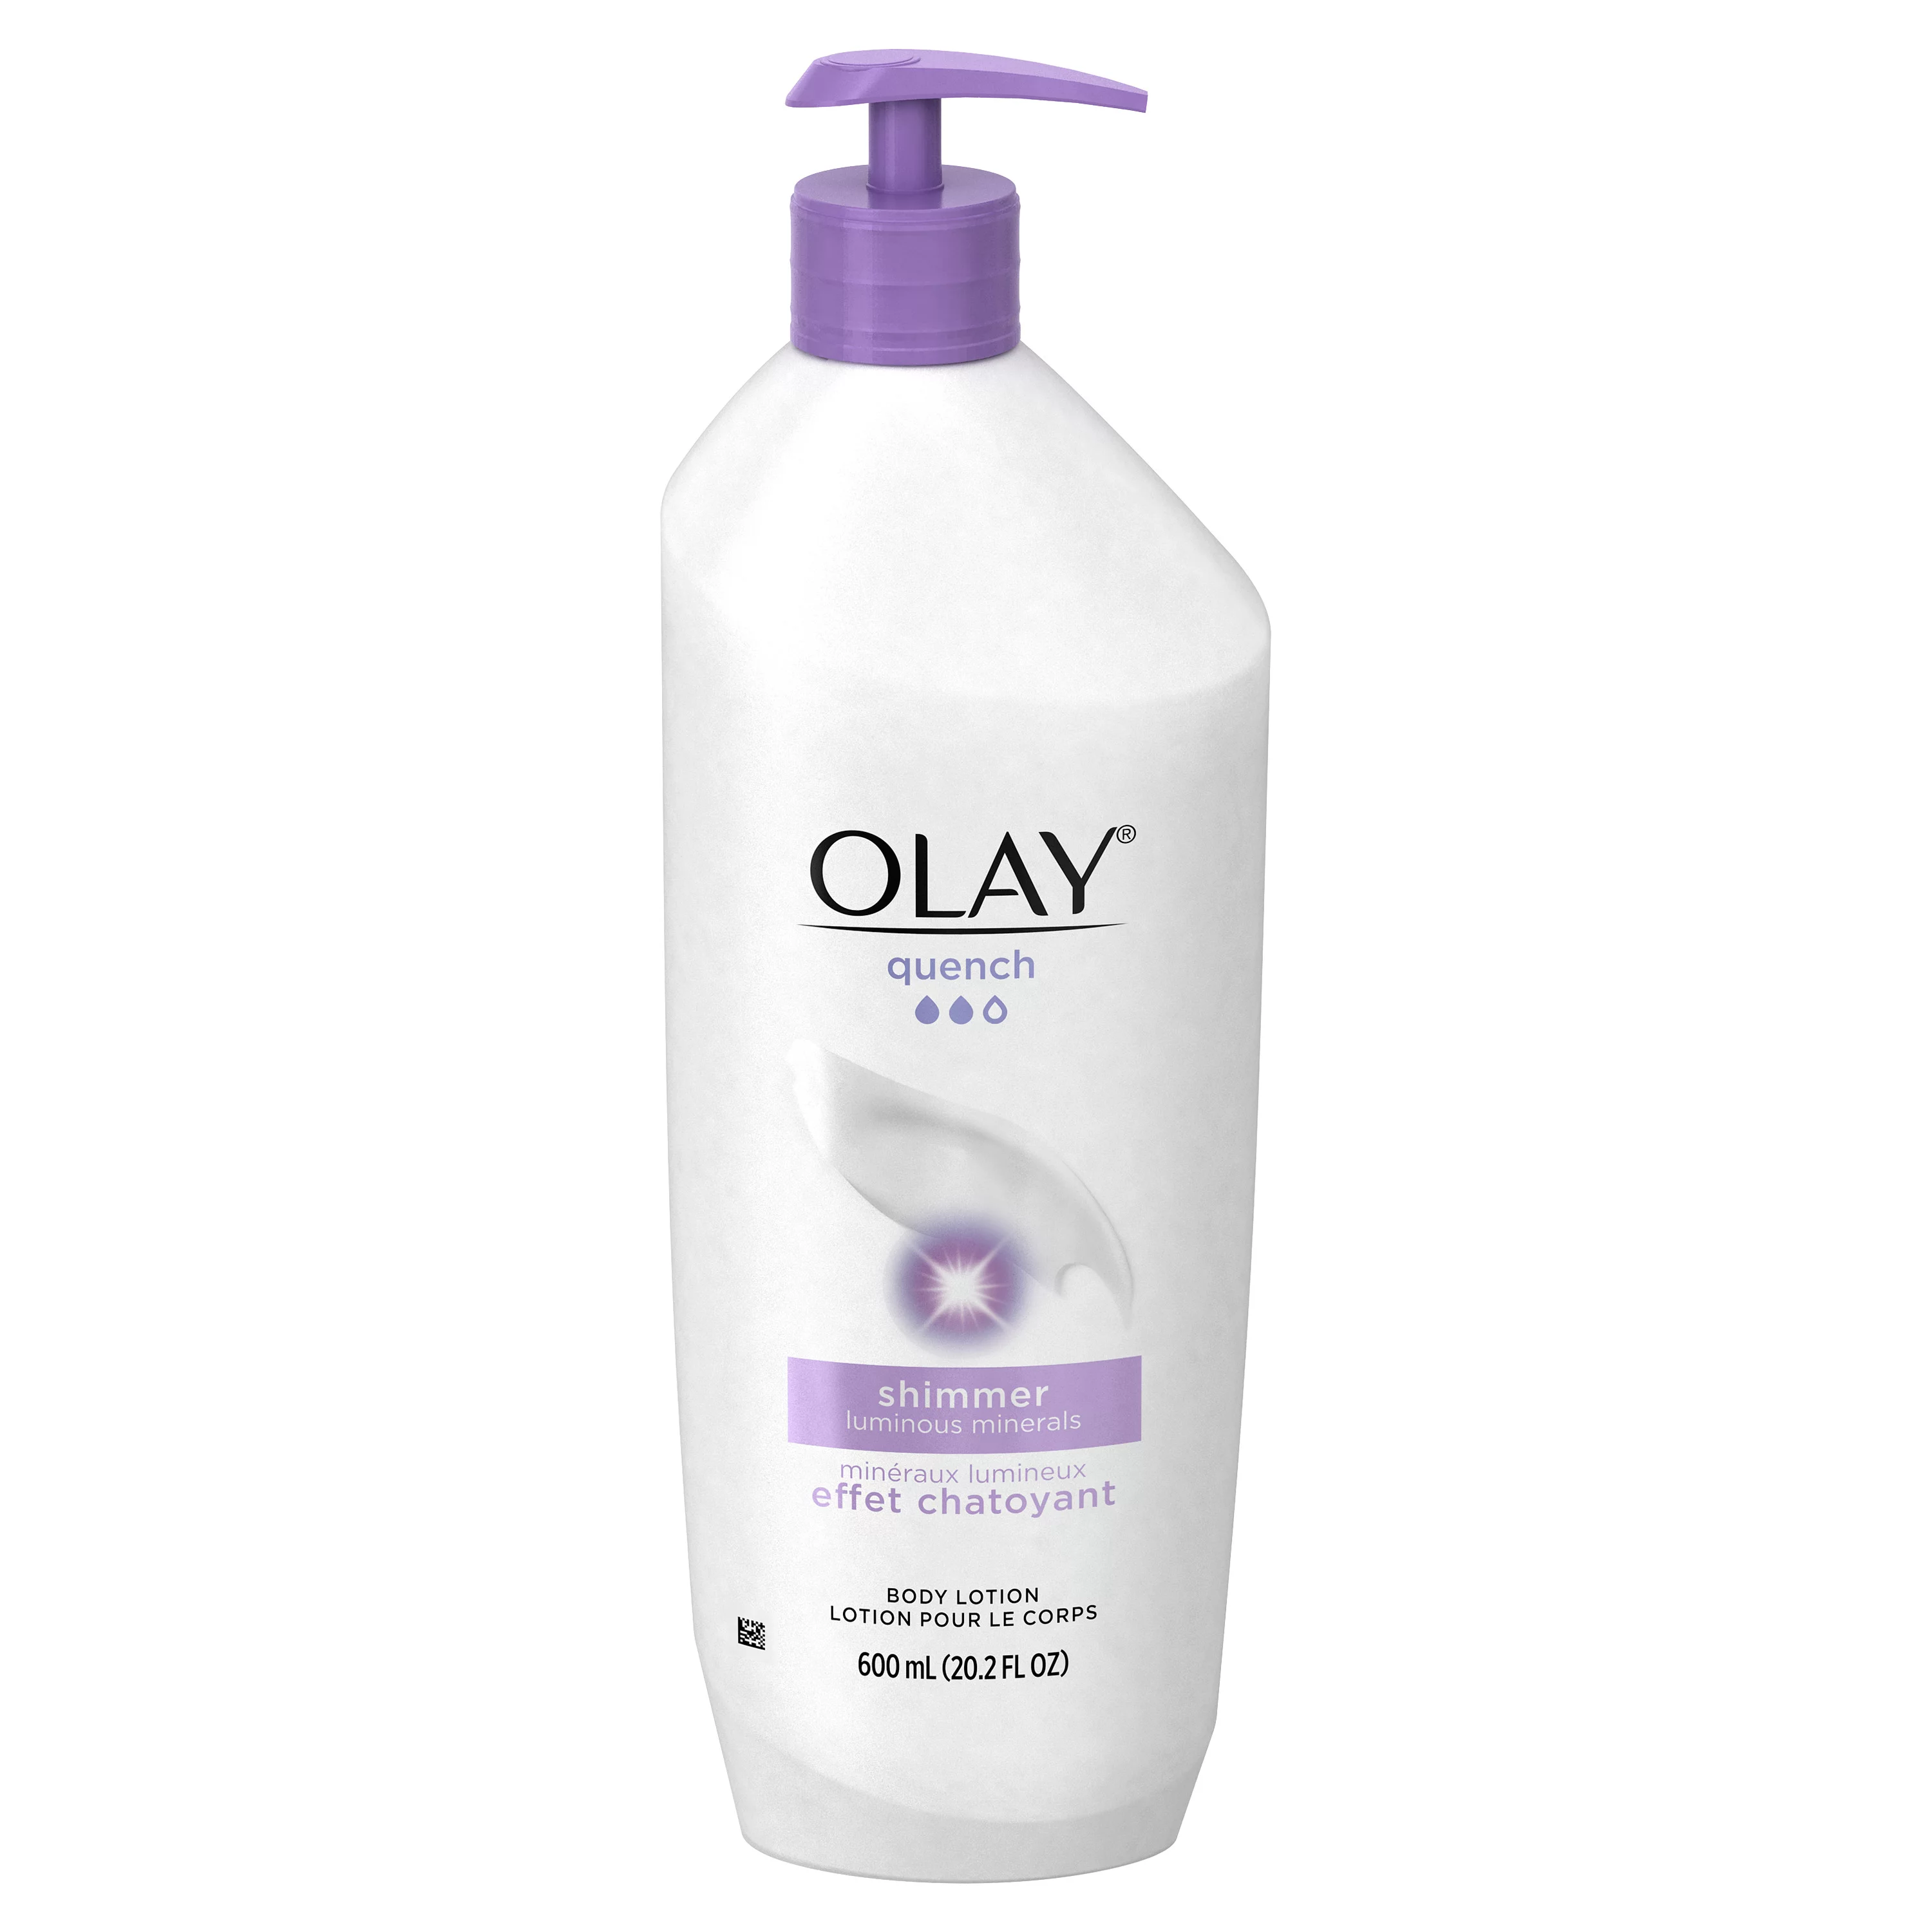 Olay Quench Shimmer Body Lotion for Women, 20.2 fl. Oz.